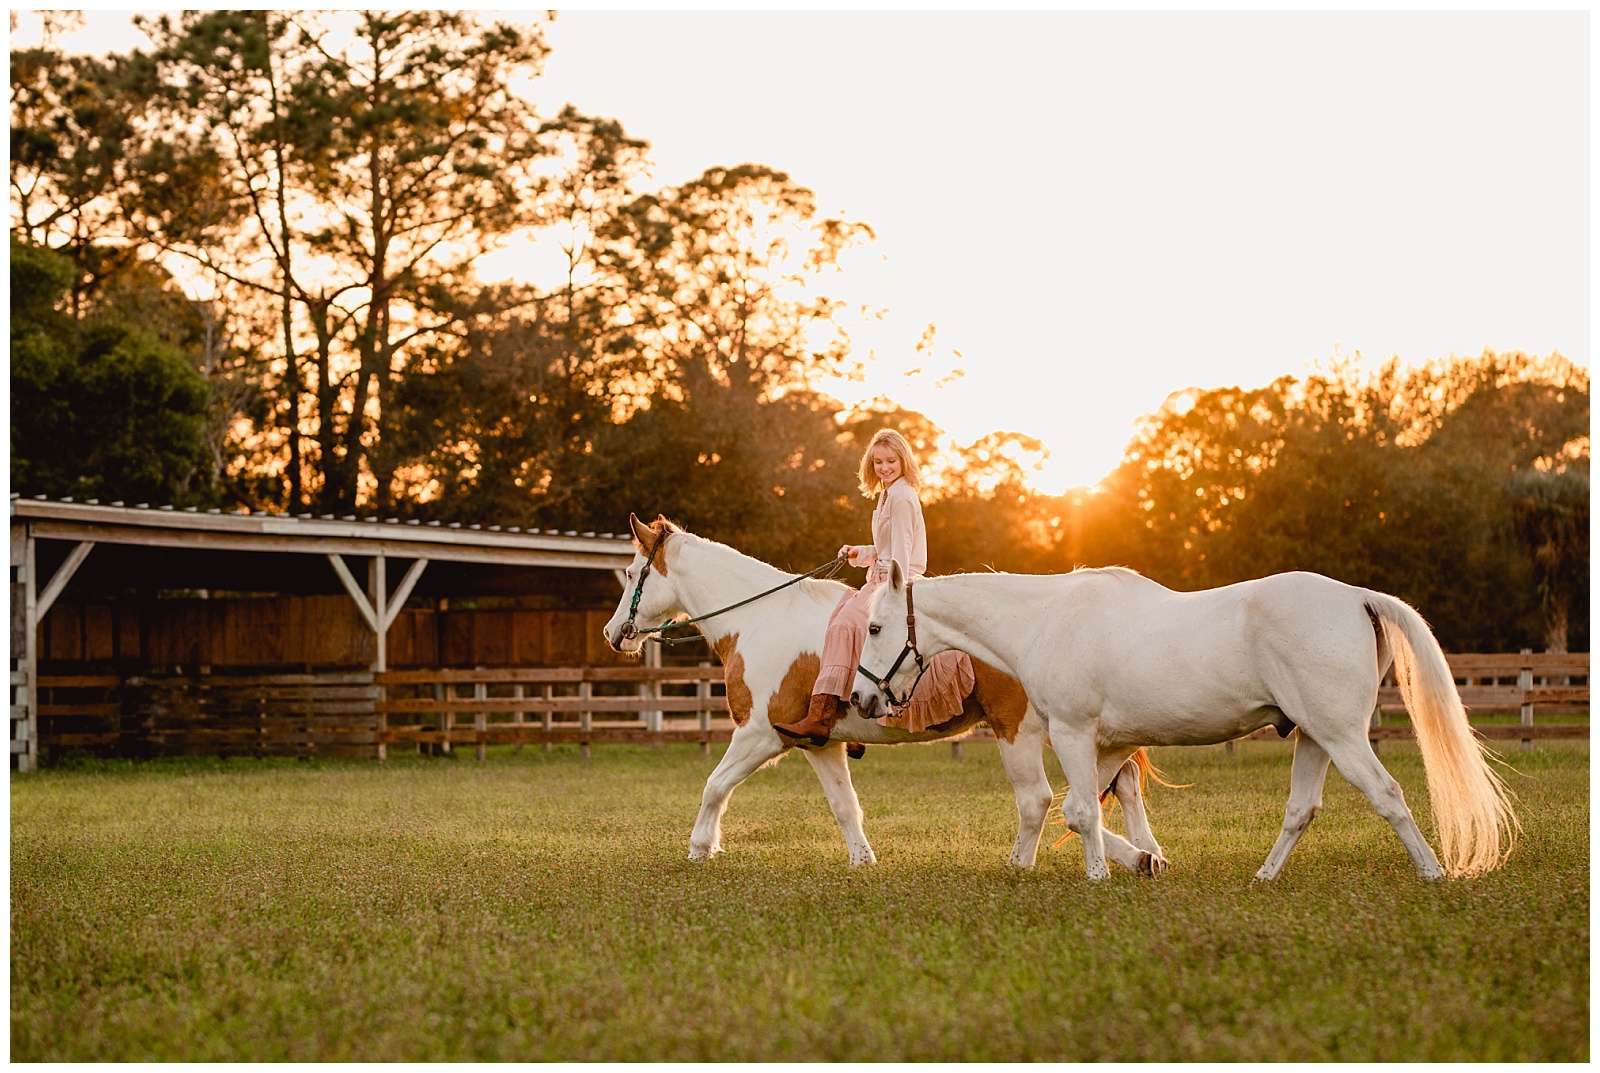 South Florida Equestrian photoshoot during golden hour with two horses.